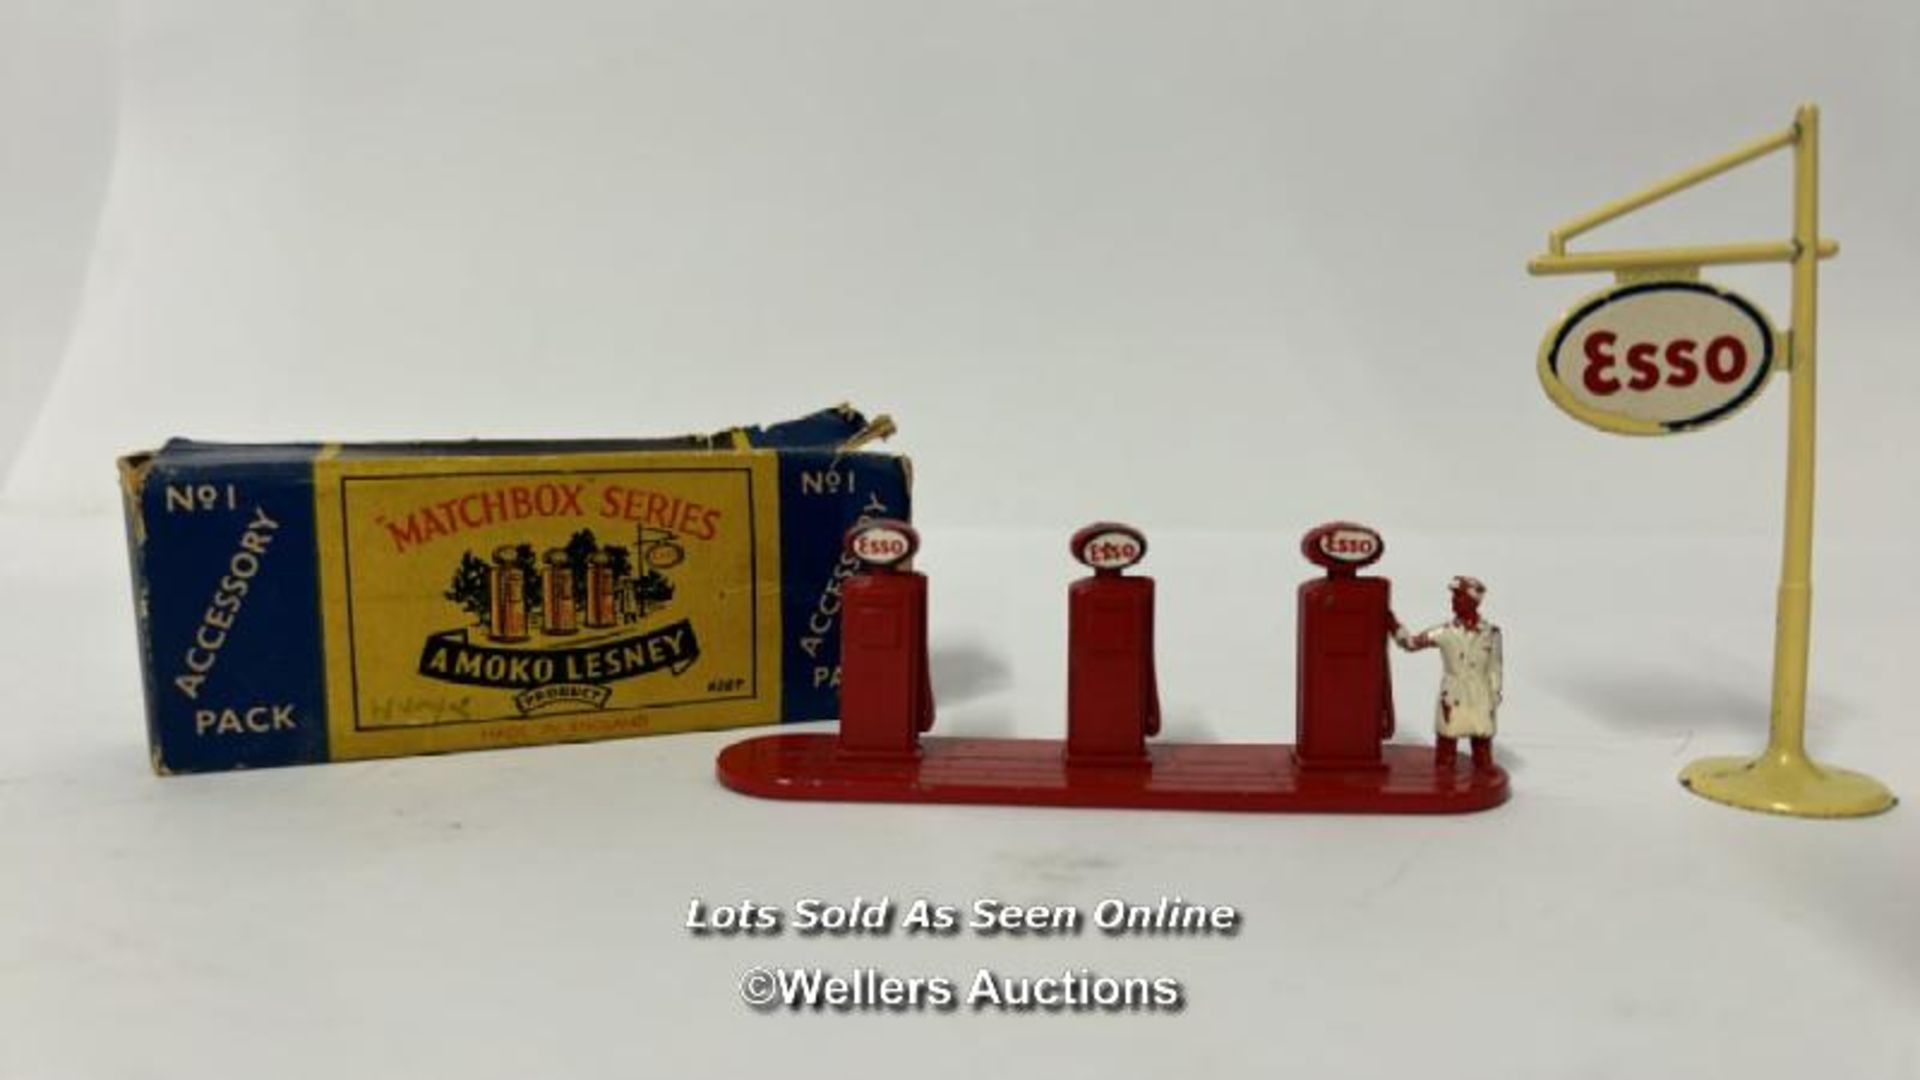 Vintage Matchbox Models of Yesteryear including Moko Lesney accessory pack no.1 Esso gas pumps and - Image 2 of 21